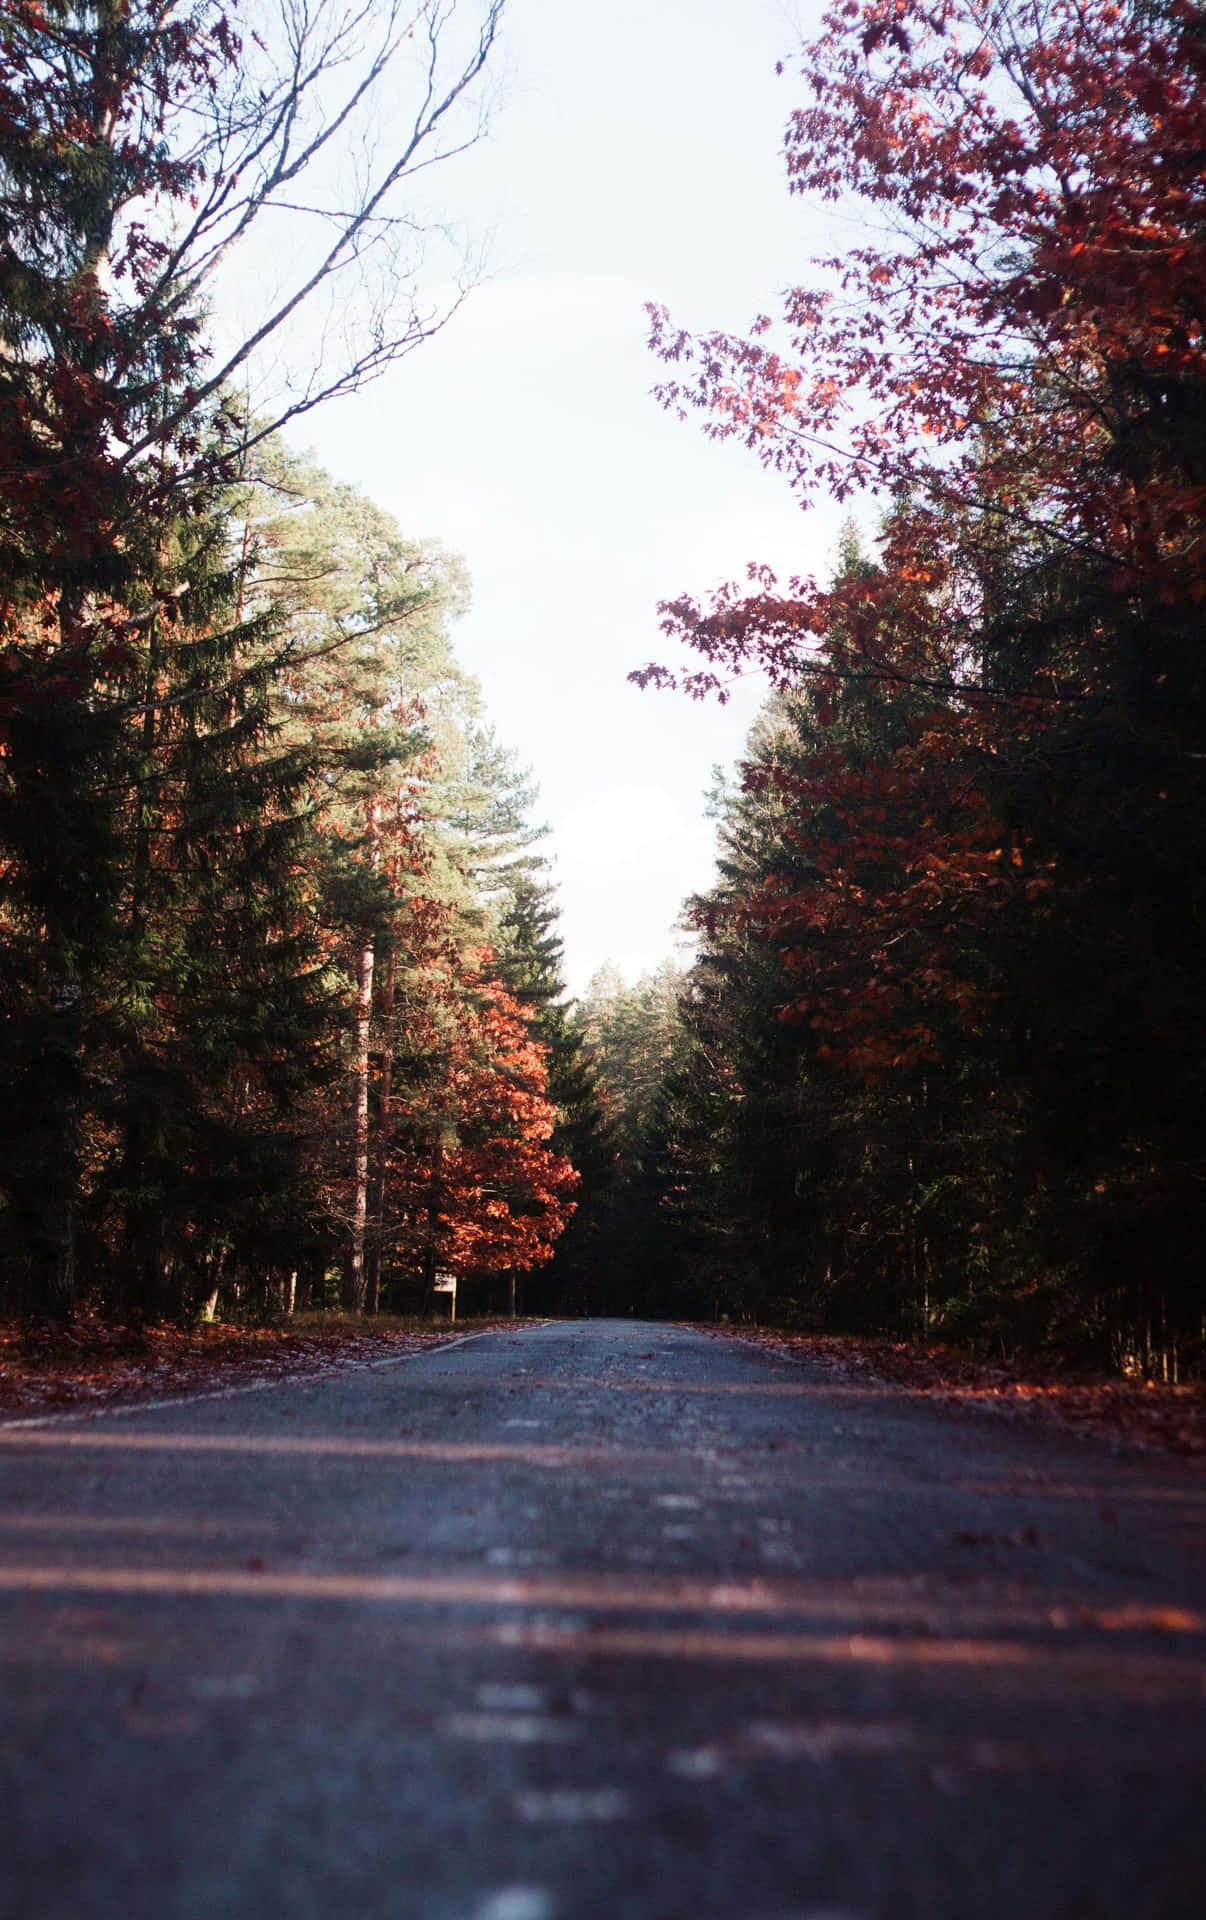 Autumn Forest Road Scenery Wallpaper